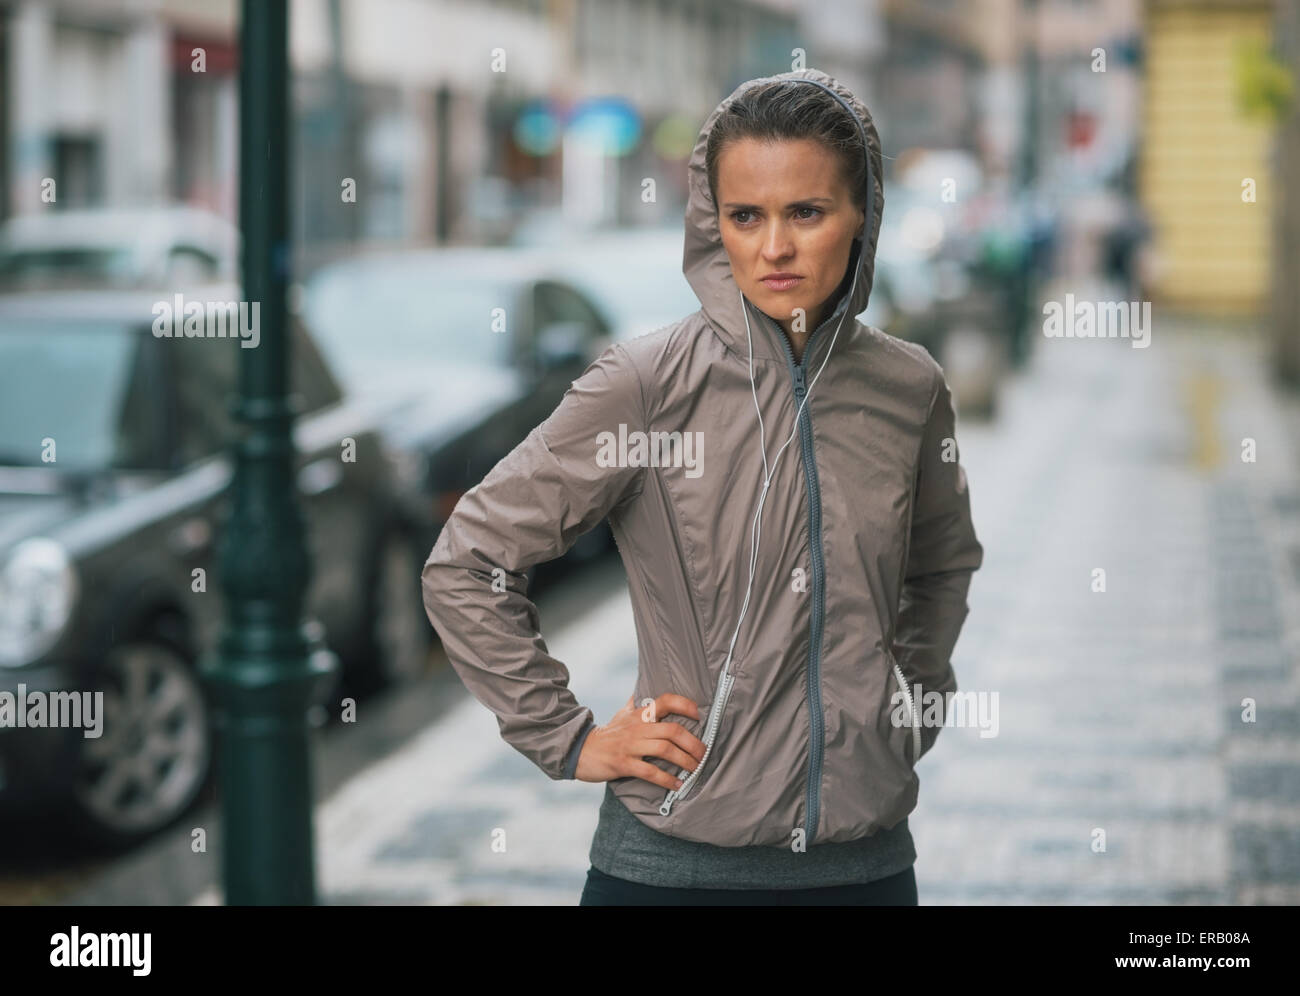 Now, if it could just stop raining for a few minutes, we could get some serious calories burned... Stock Photo